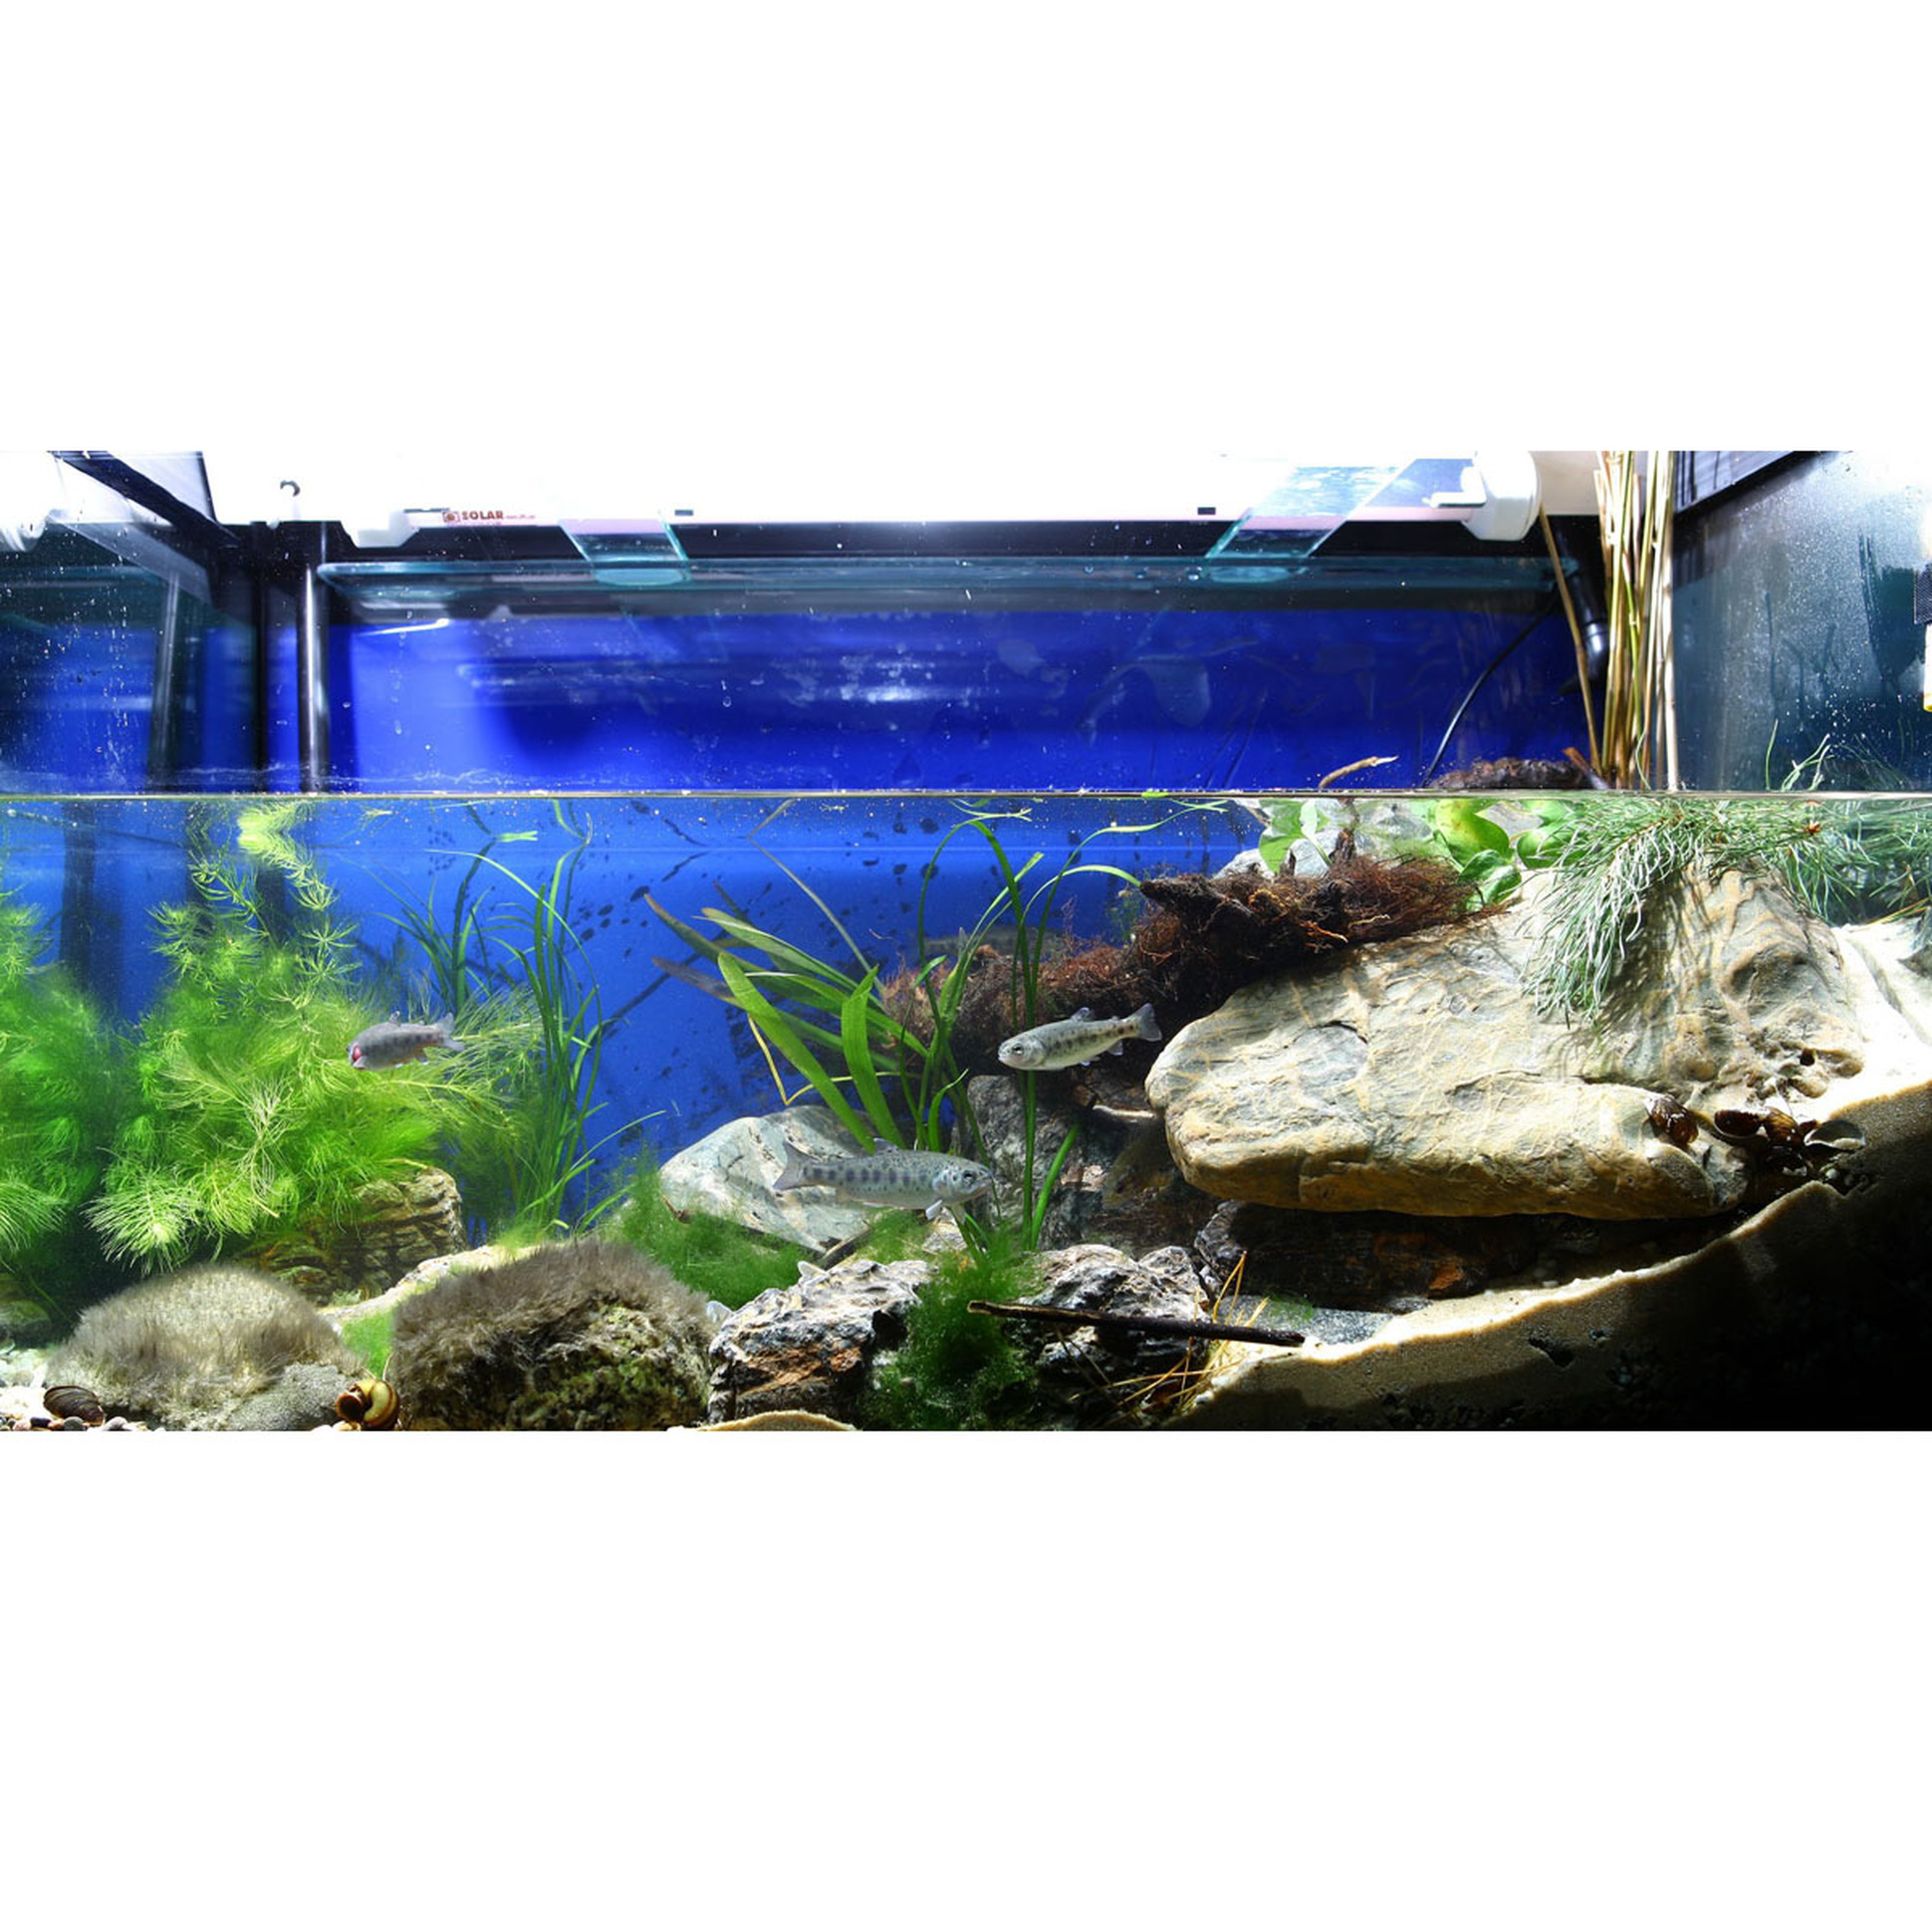 Only for the ambitious: The JBL Biotope Aquarium Design Contest 2014